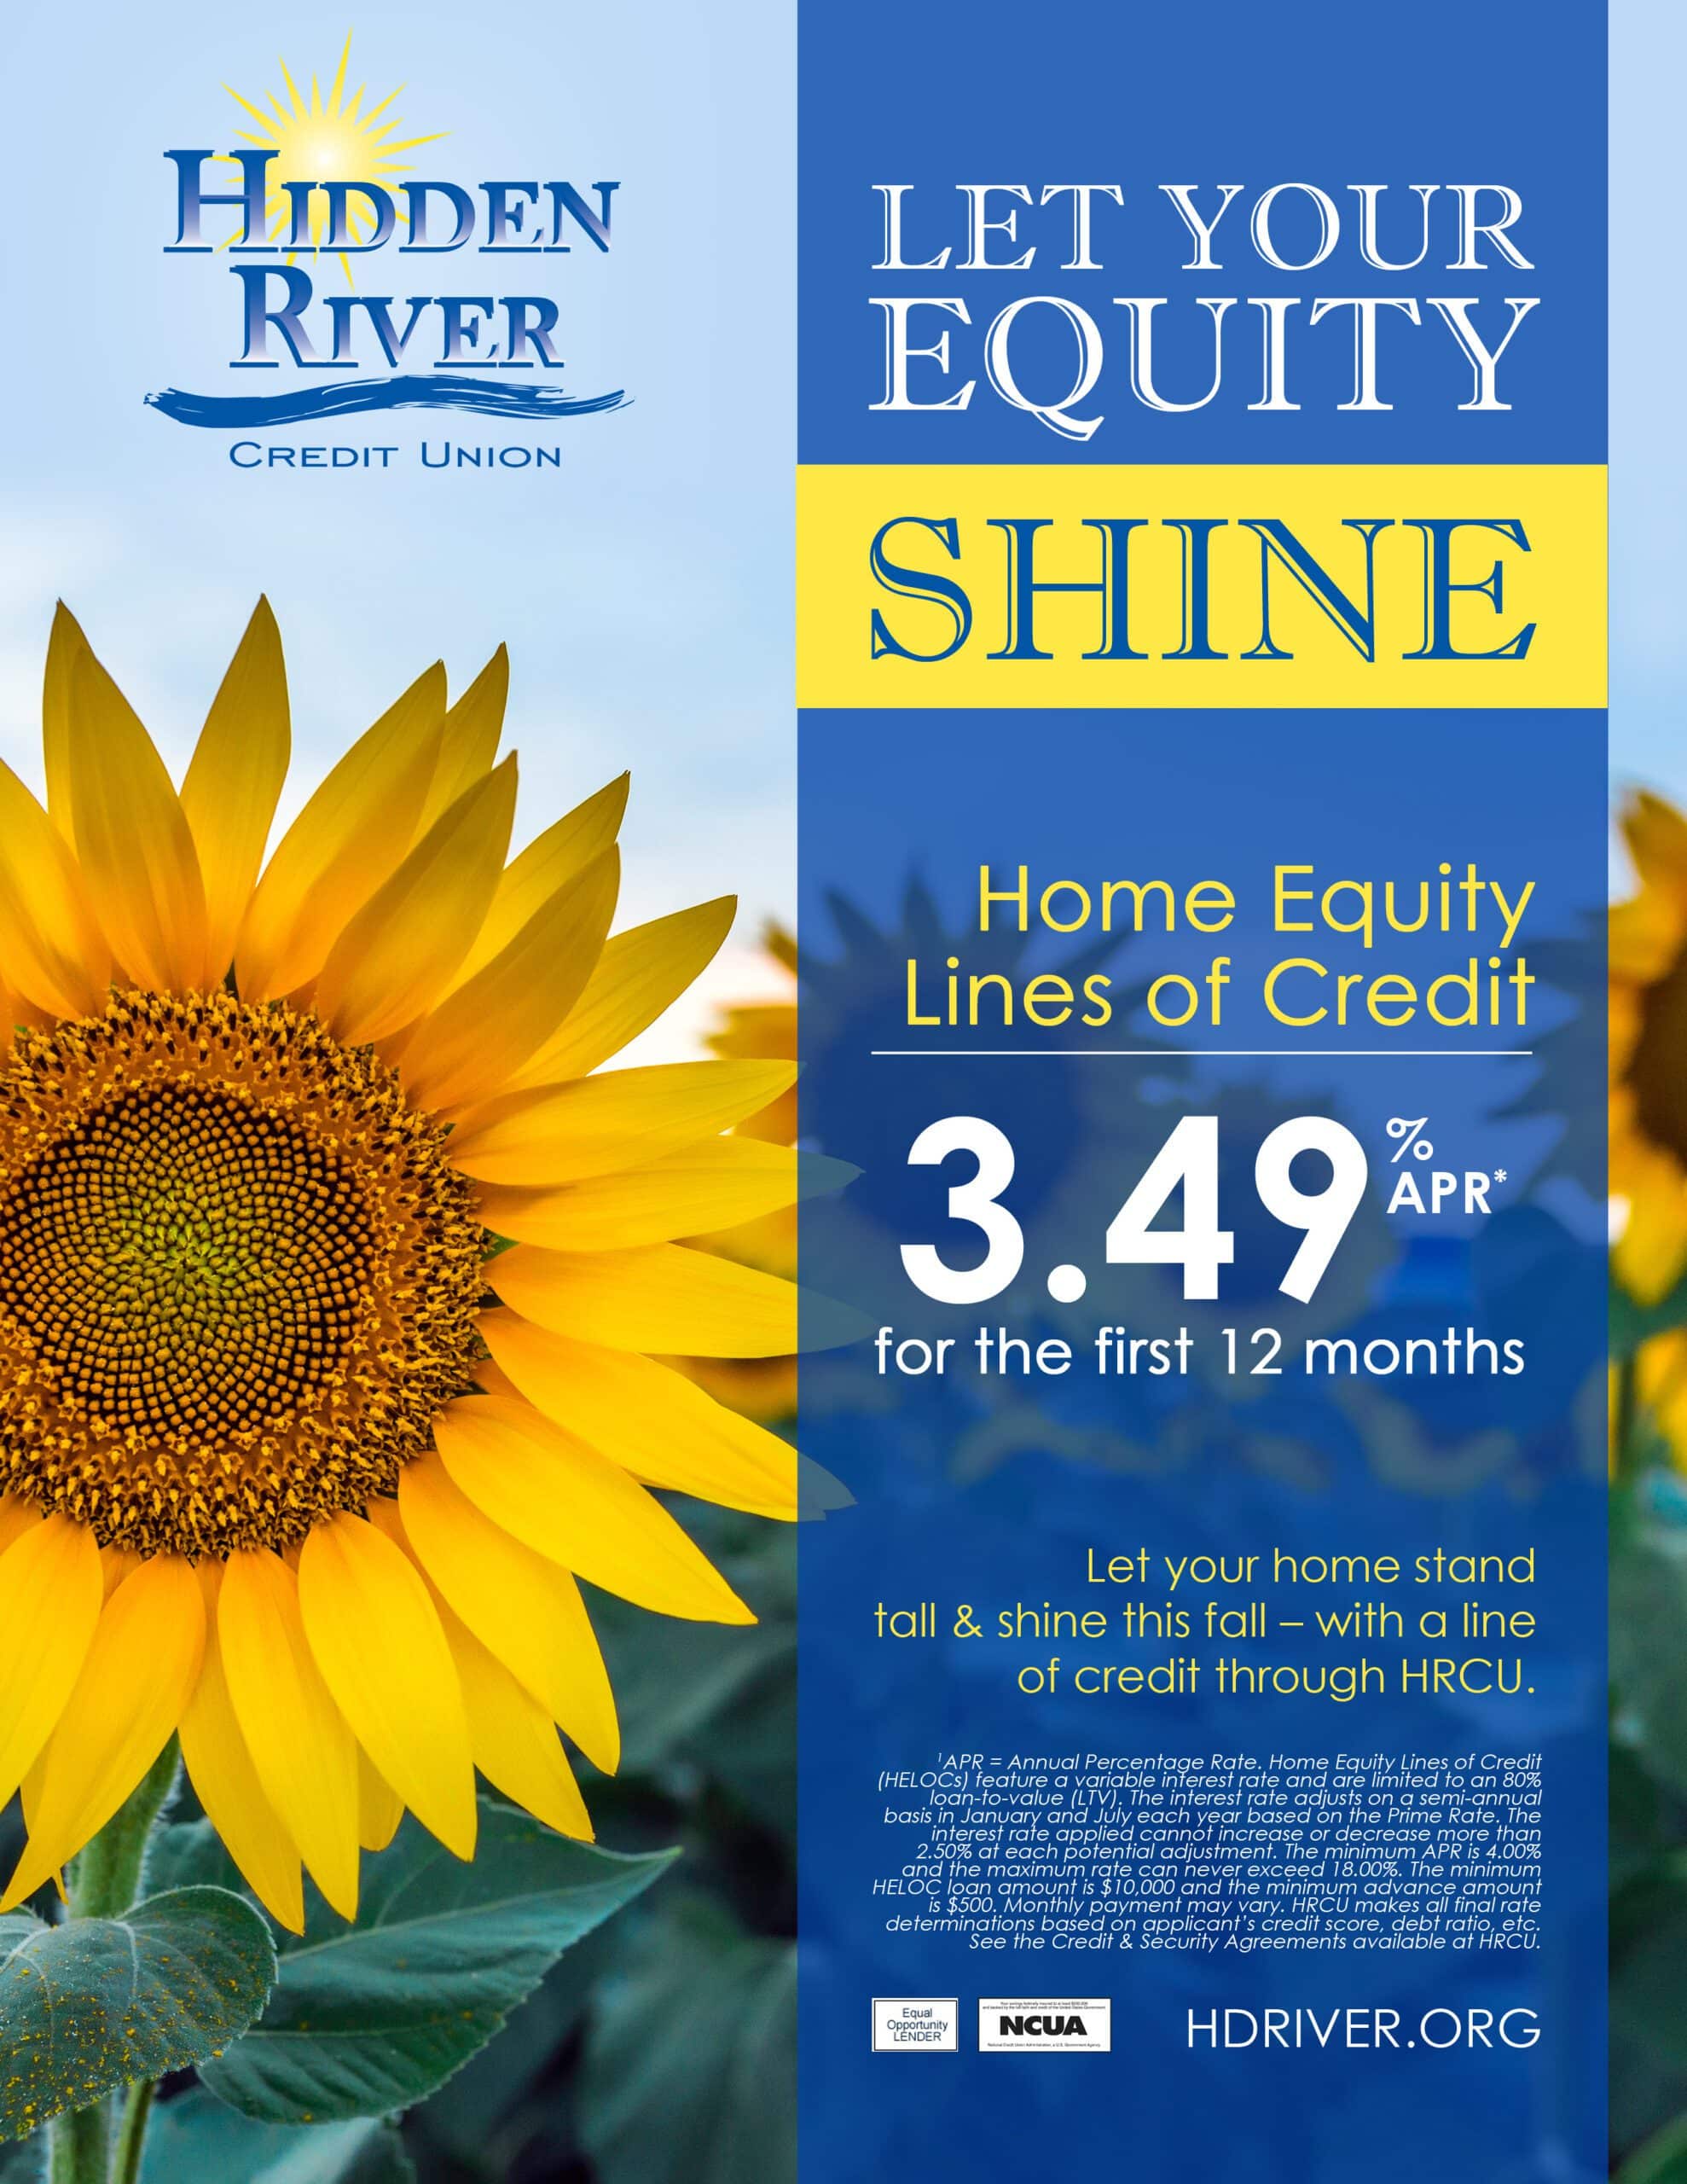 Flyer with various sunflowers and green leaves and a light blue sky. Blue transparent vertical bar along right side reads "Let Your Equity" in white and "Shine" in blue with a yellow background, and promotional rate text including "Home Equity Lines of Credit, 3.49% APR for the first 12 months." Yellow text underneath reads "Let your home stand tall & shine this fall - with a line of credit through HRCU." Also, includes blue HRCU logo, hdriver.org, disclosures, and both NCUA and EOL logos.